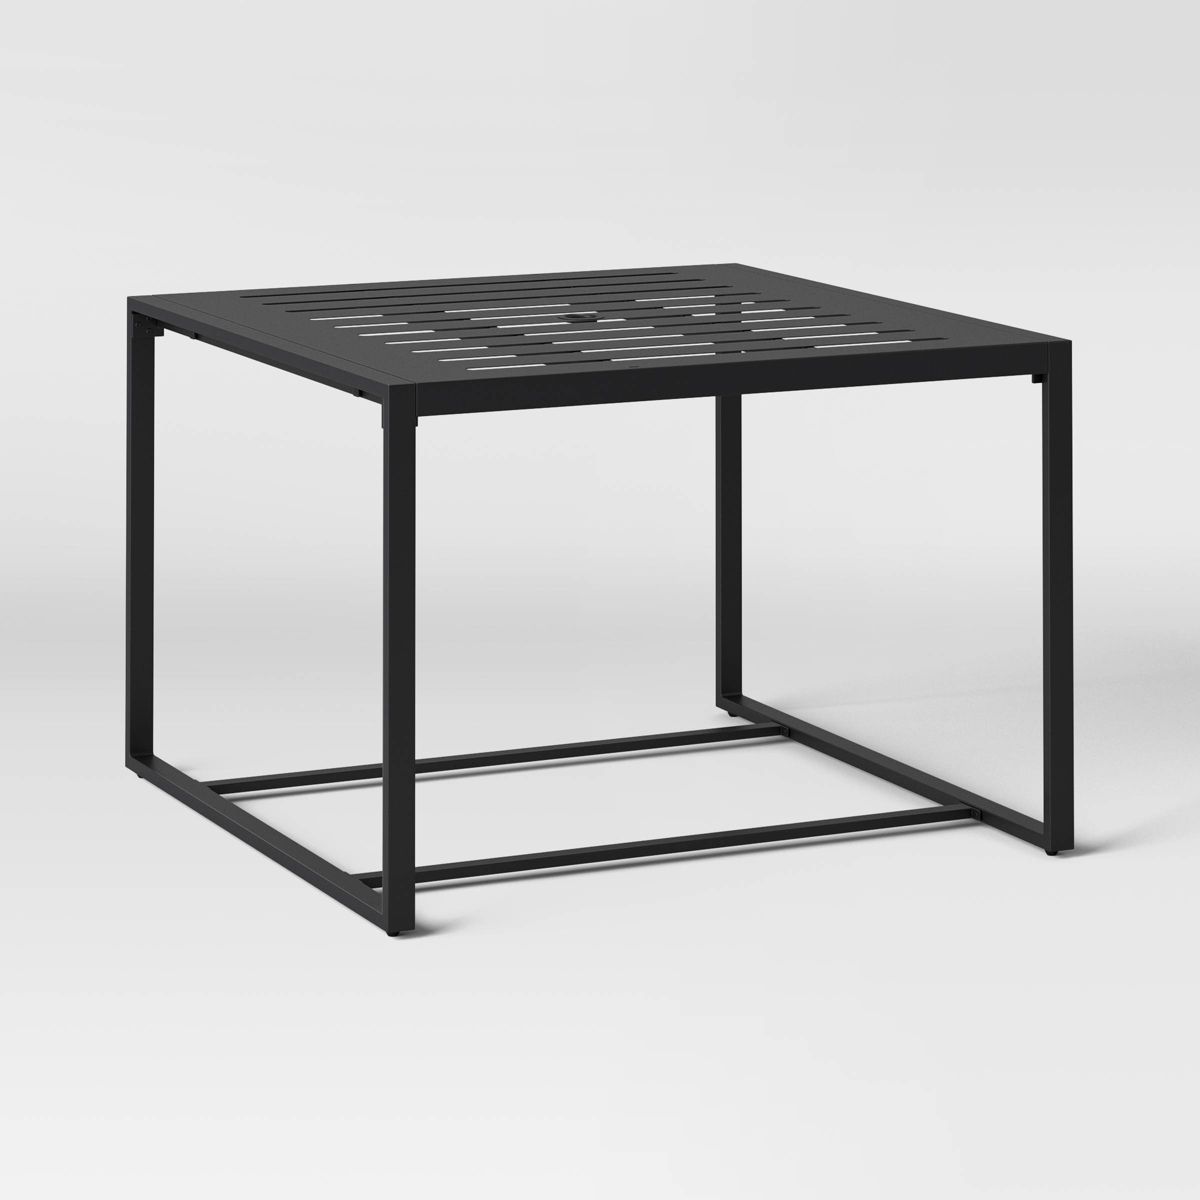 Henning 4 Person Rectangle Patio Dining Table - Black - Threshold™ | Target